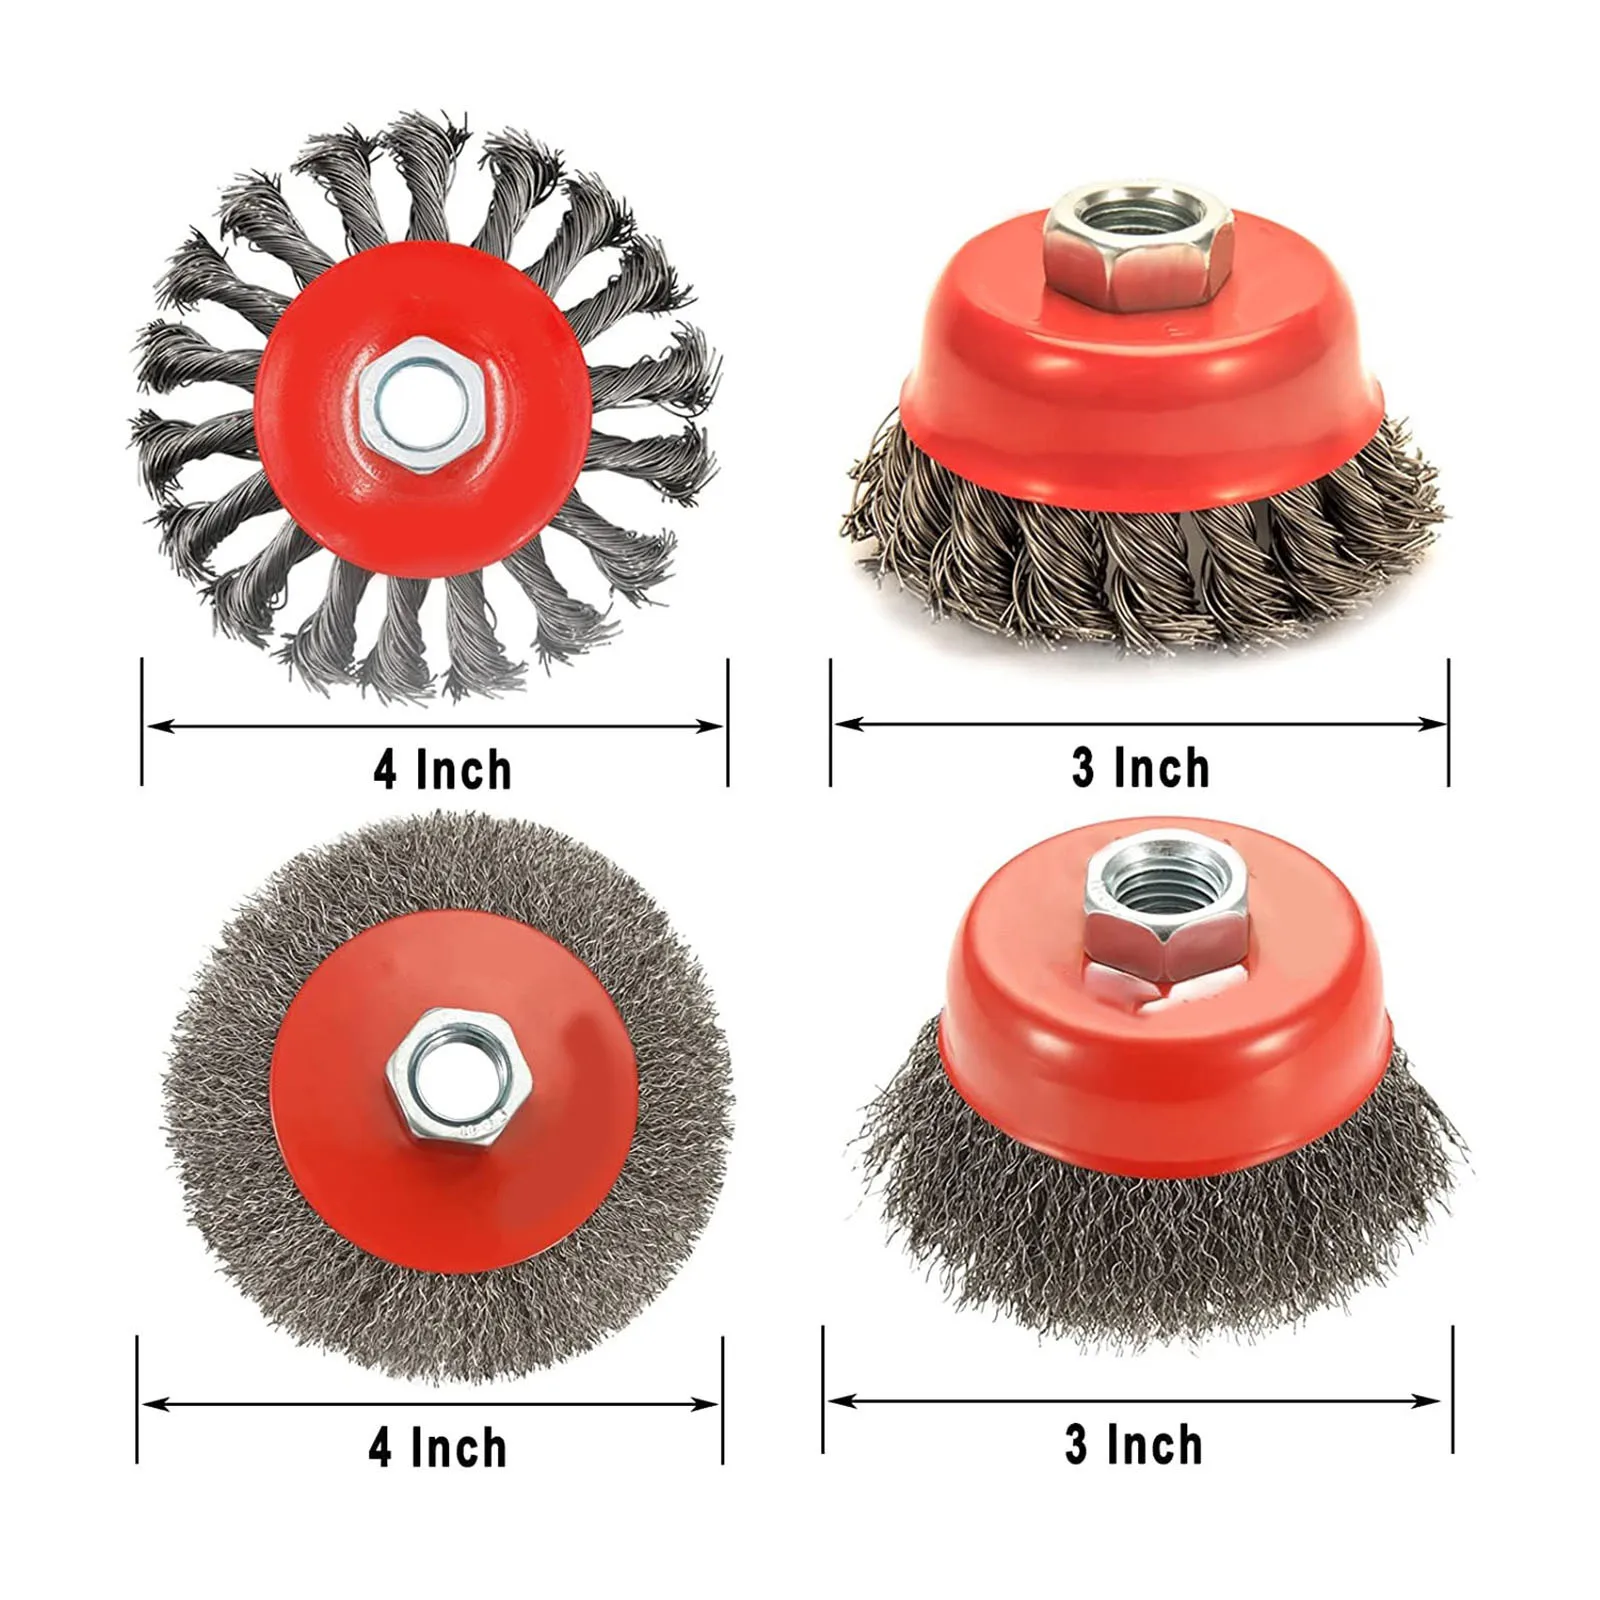 Carbon Steel Wire Wheel Cup Brush Set